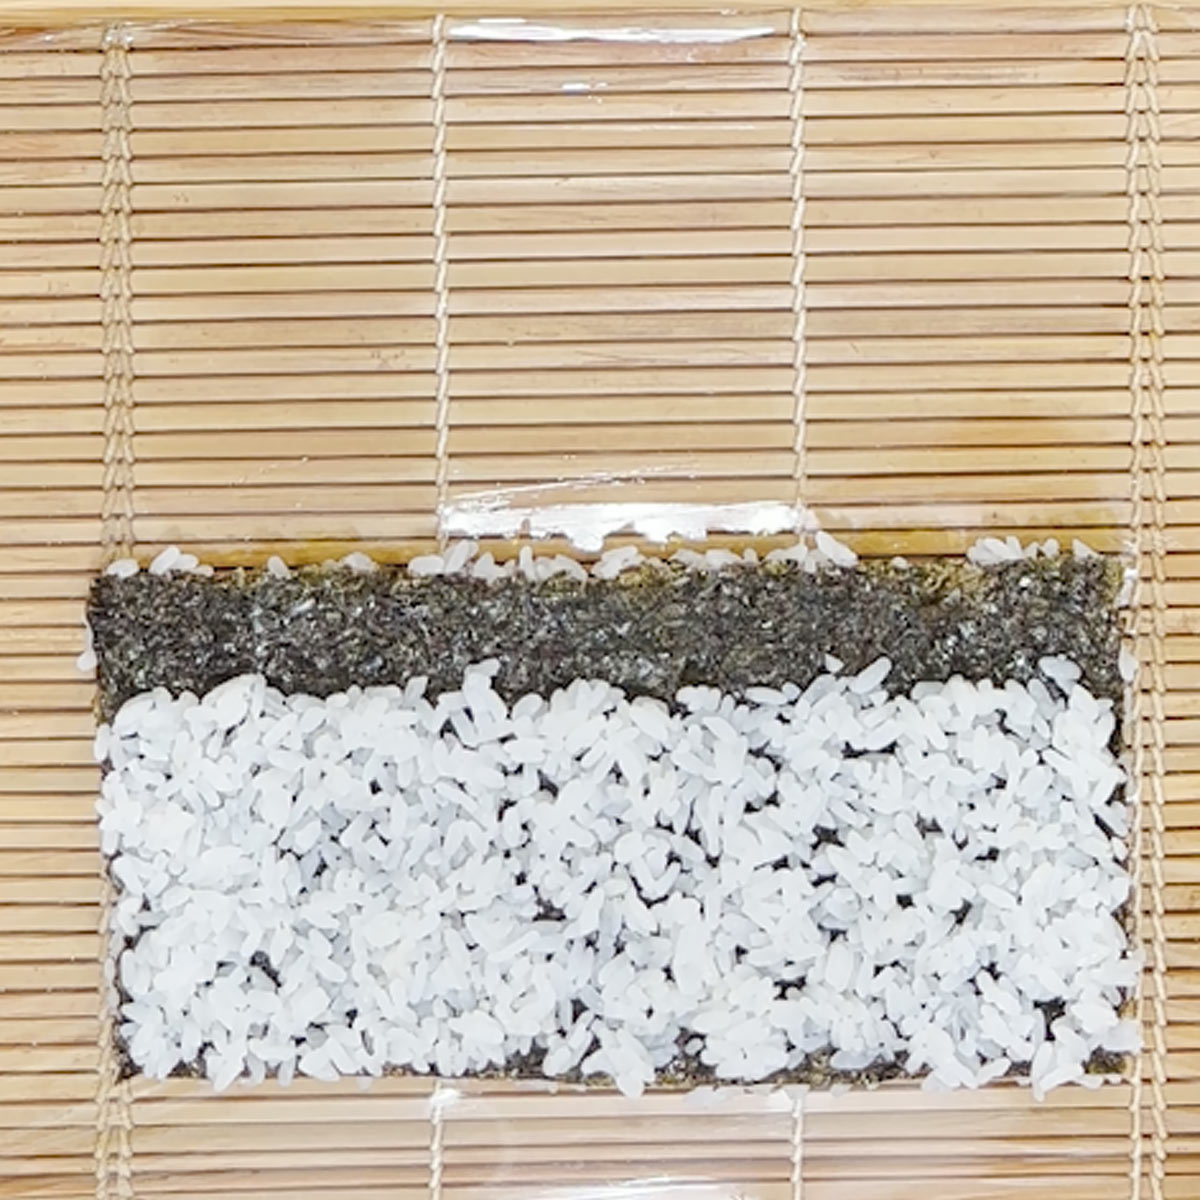 stick rice on nori for filling